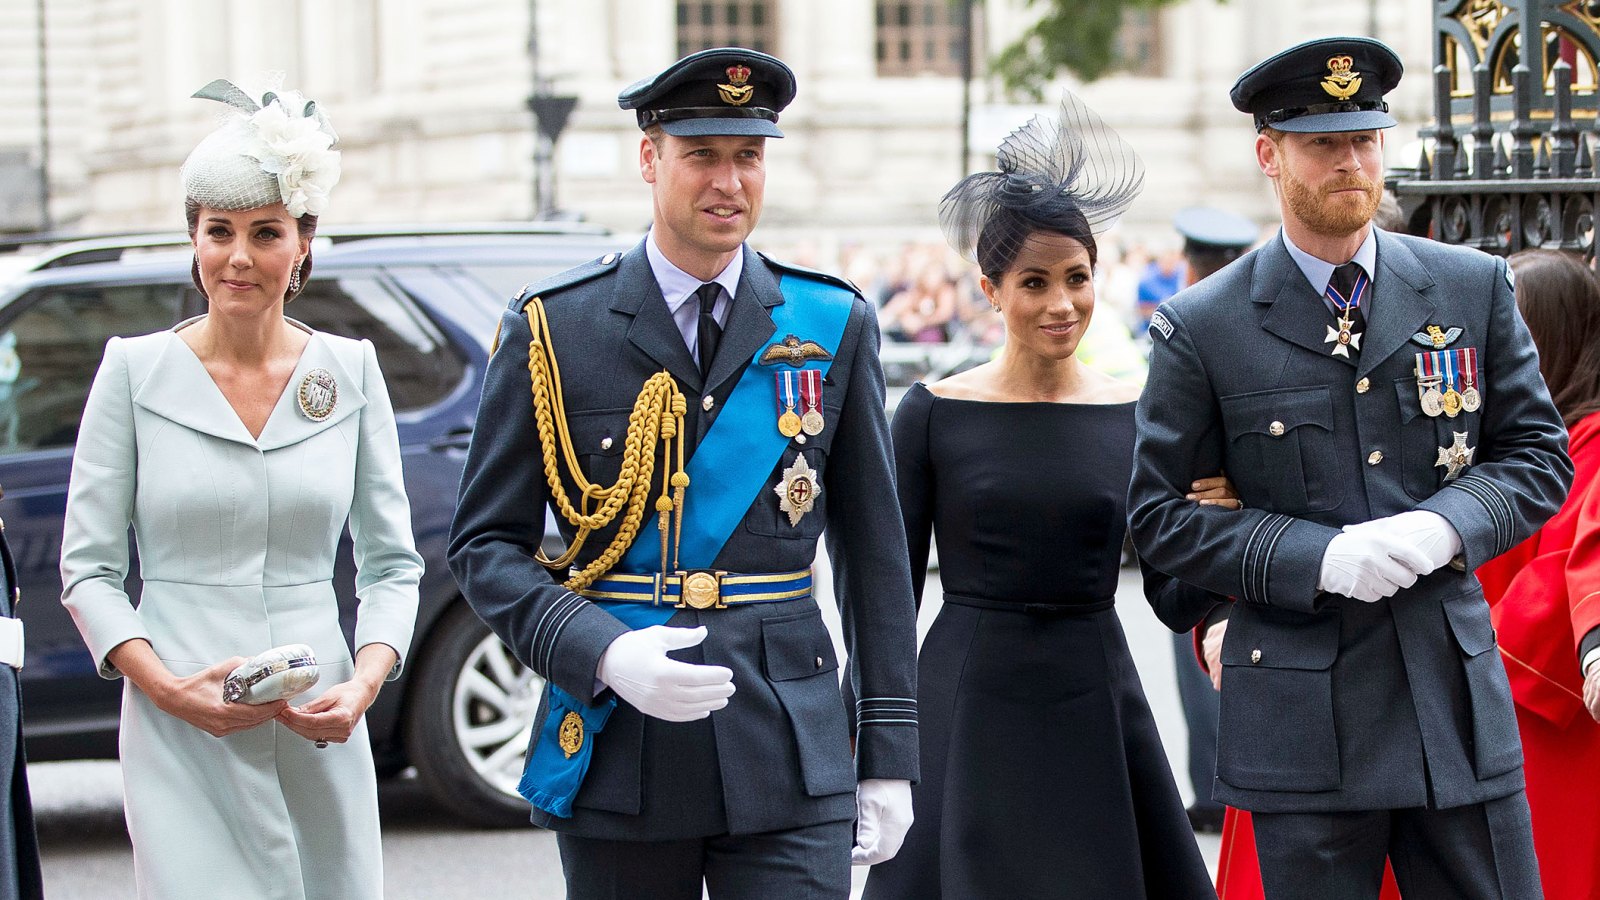 The Royals Prince William, Duchess Kate, Duchess Meghan, Prince Harry